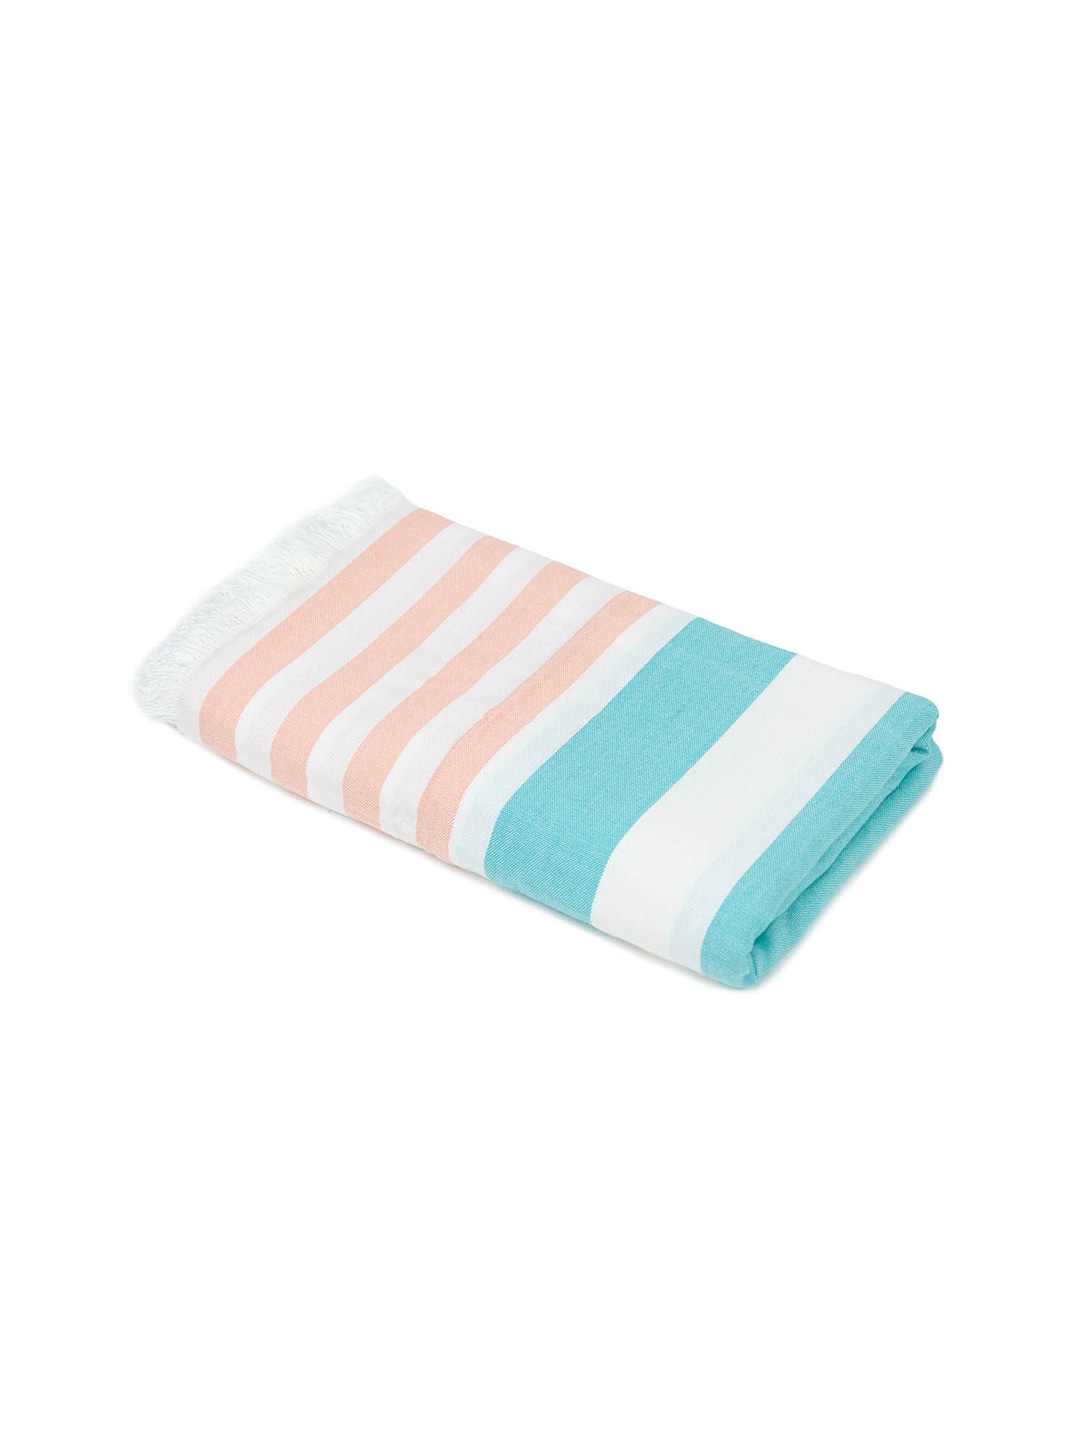 MUSH Peach & Turquoise Blue Extra Large Pure Bamboo Cabana Turkish Towel Price in India